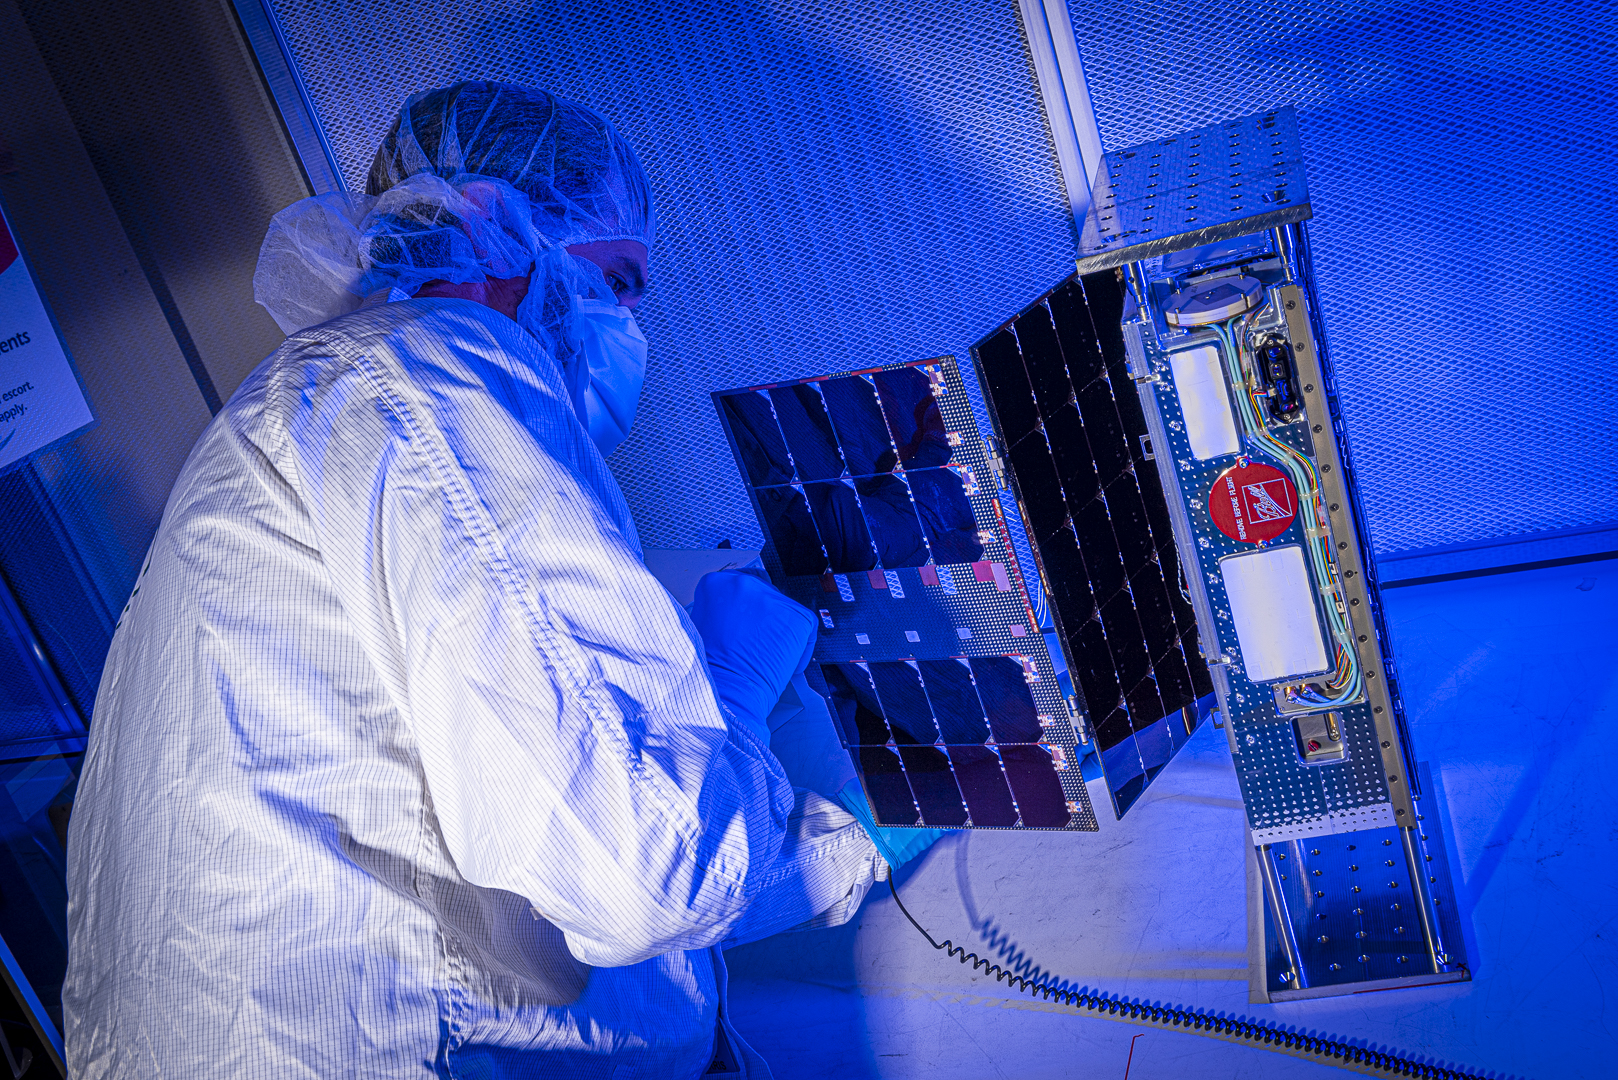 A technician in a white lab coat with a hairnet and mask leans over a CubeSat. The satellite is a thin rectangle, like a computer tower, with electronic components on the near side. Out one longer side, a solar panel is partly unfurled. The tech is inspecting the solar panel. The entire scene is bathed in blue light.